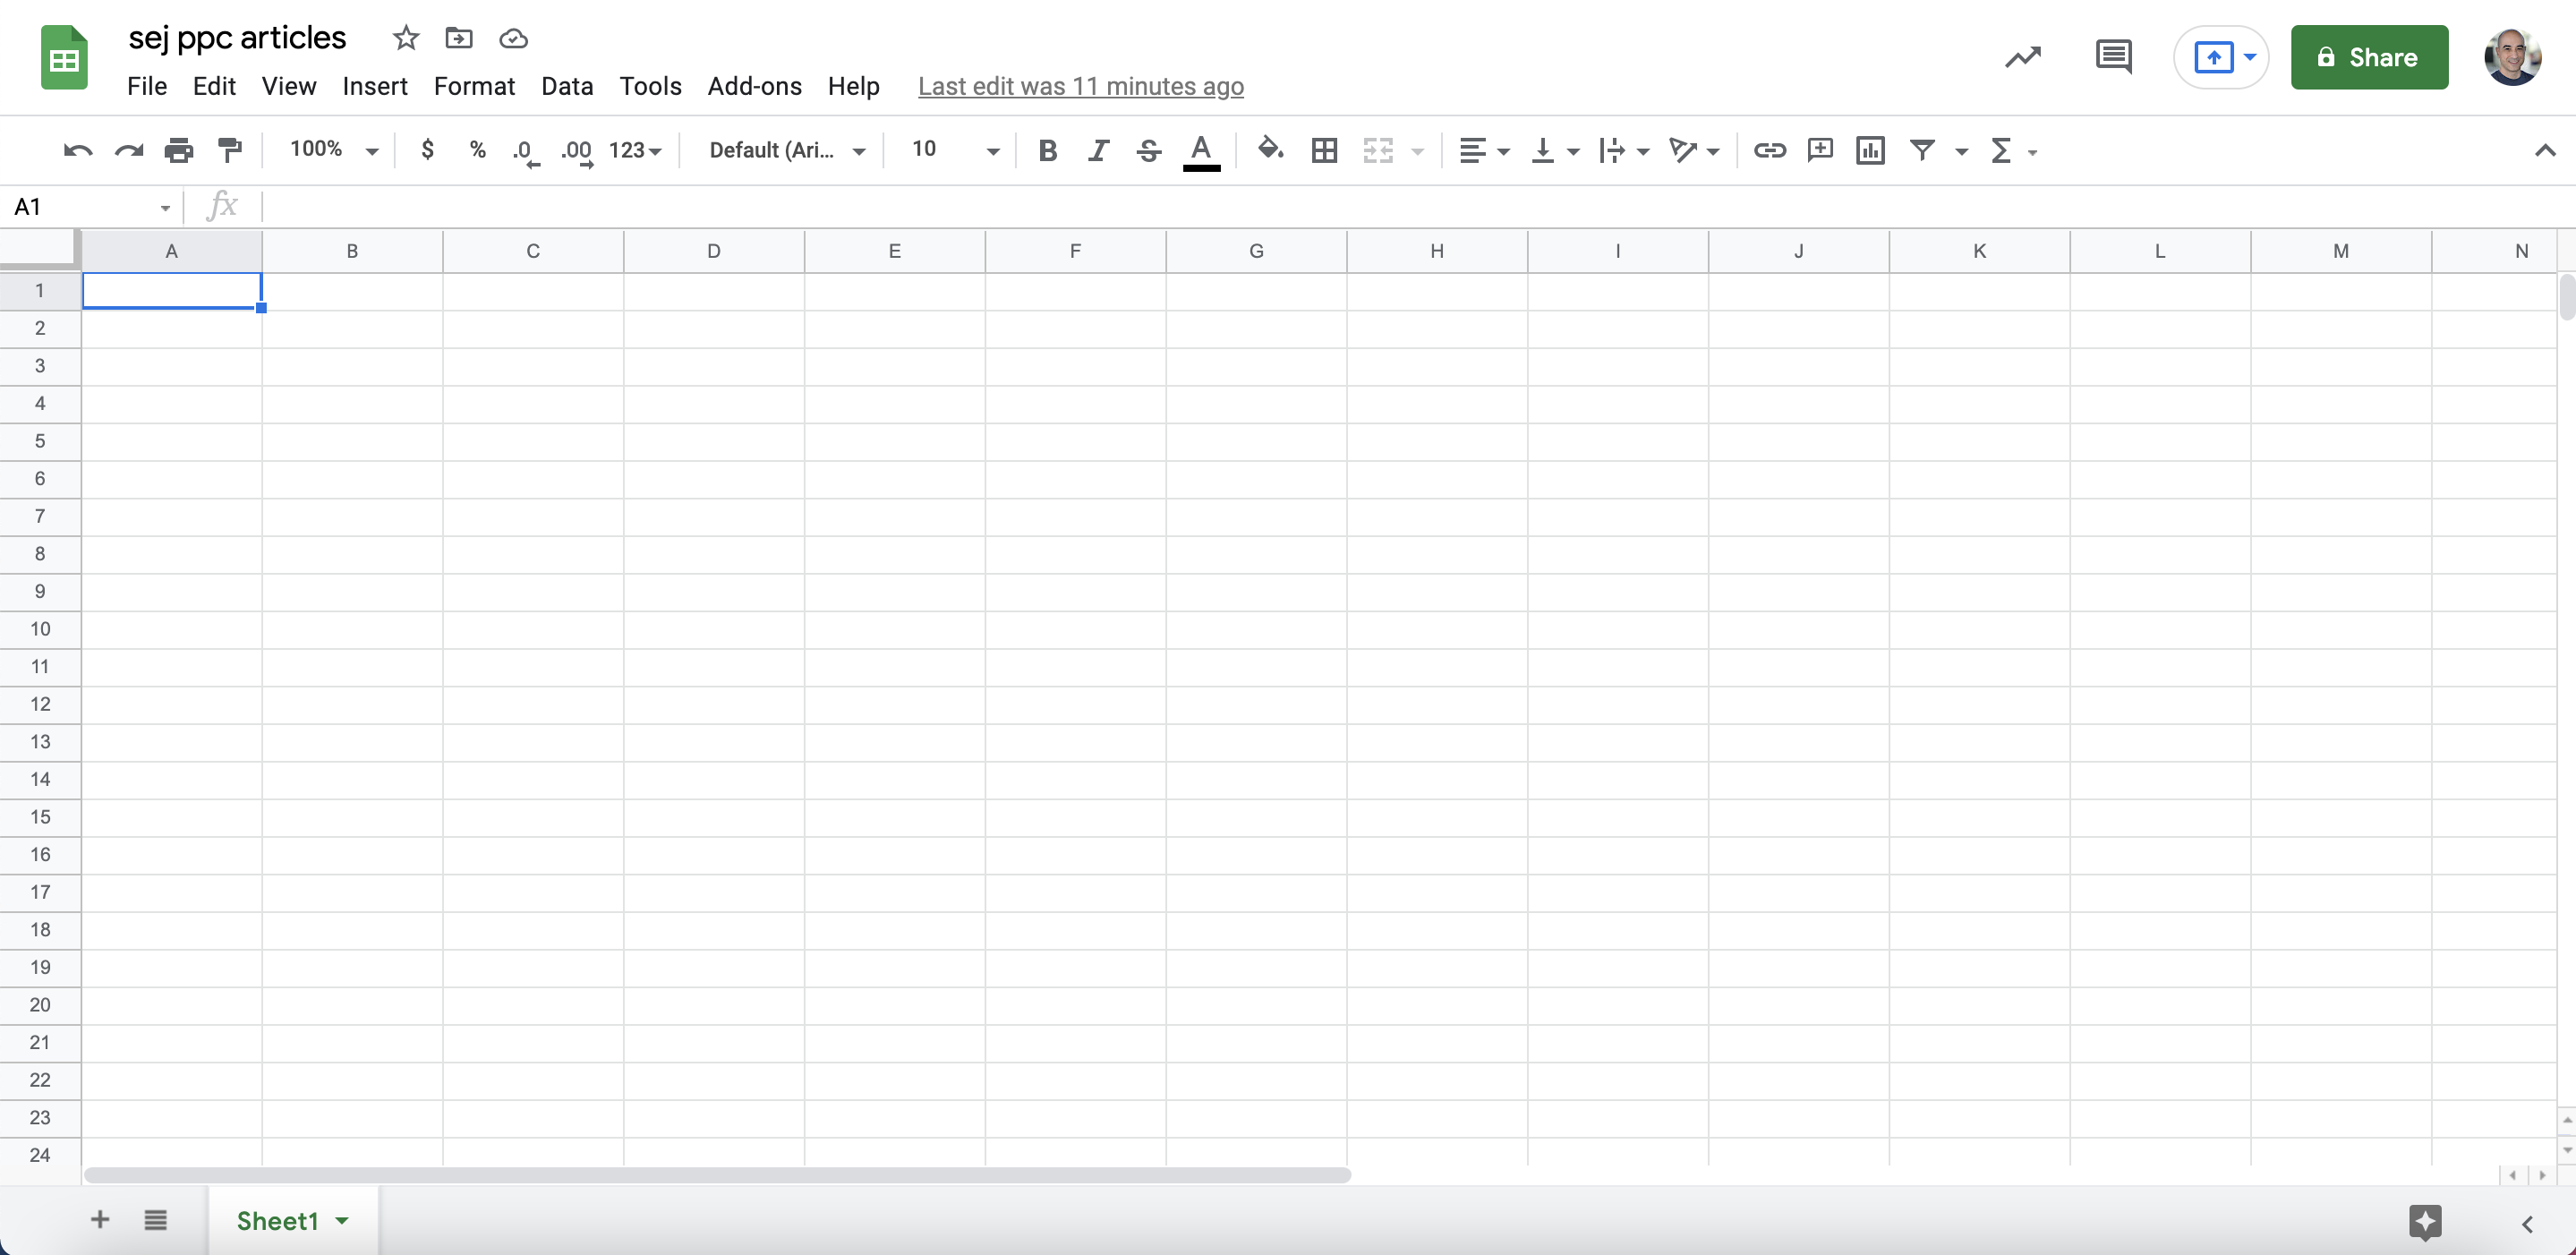 Start with a blank Google Sheets document.